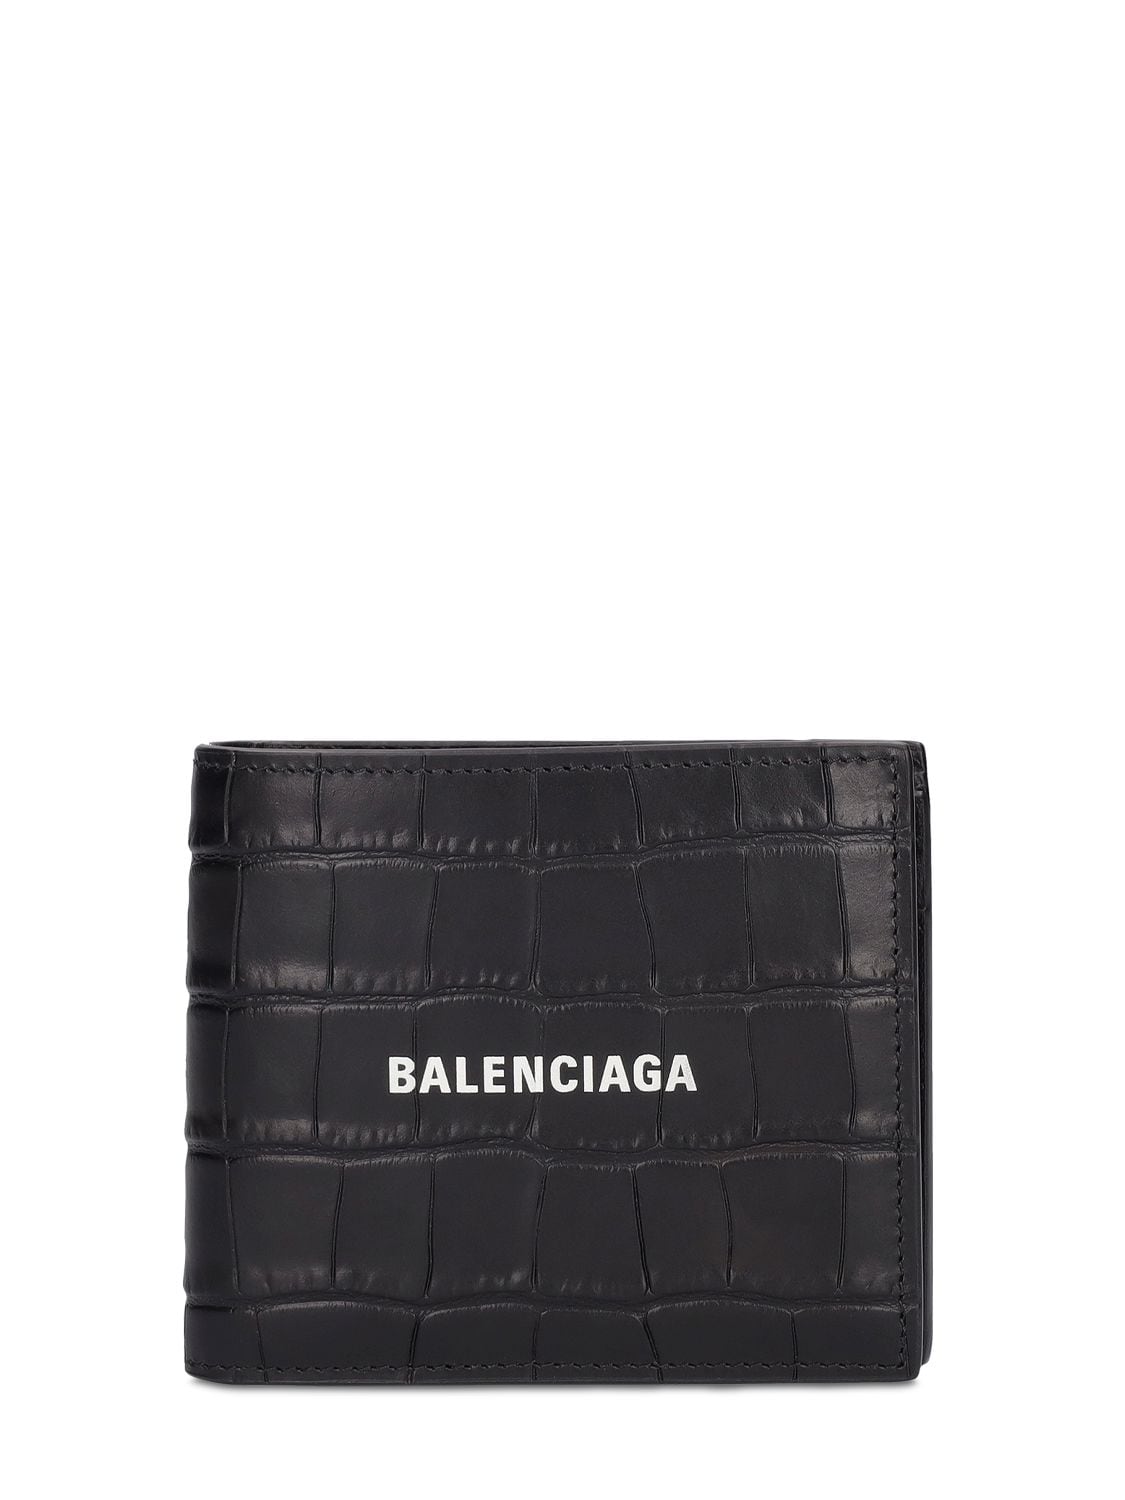 Balenciaga Croc Embossed Leather Wallet In Black | ModeSens